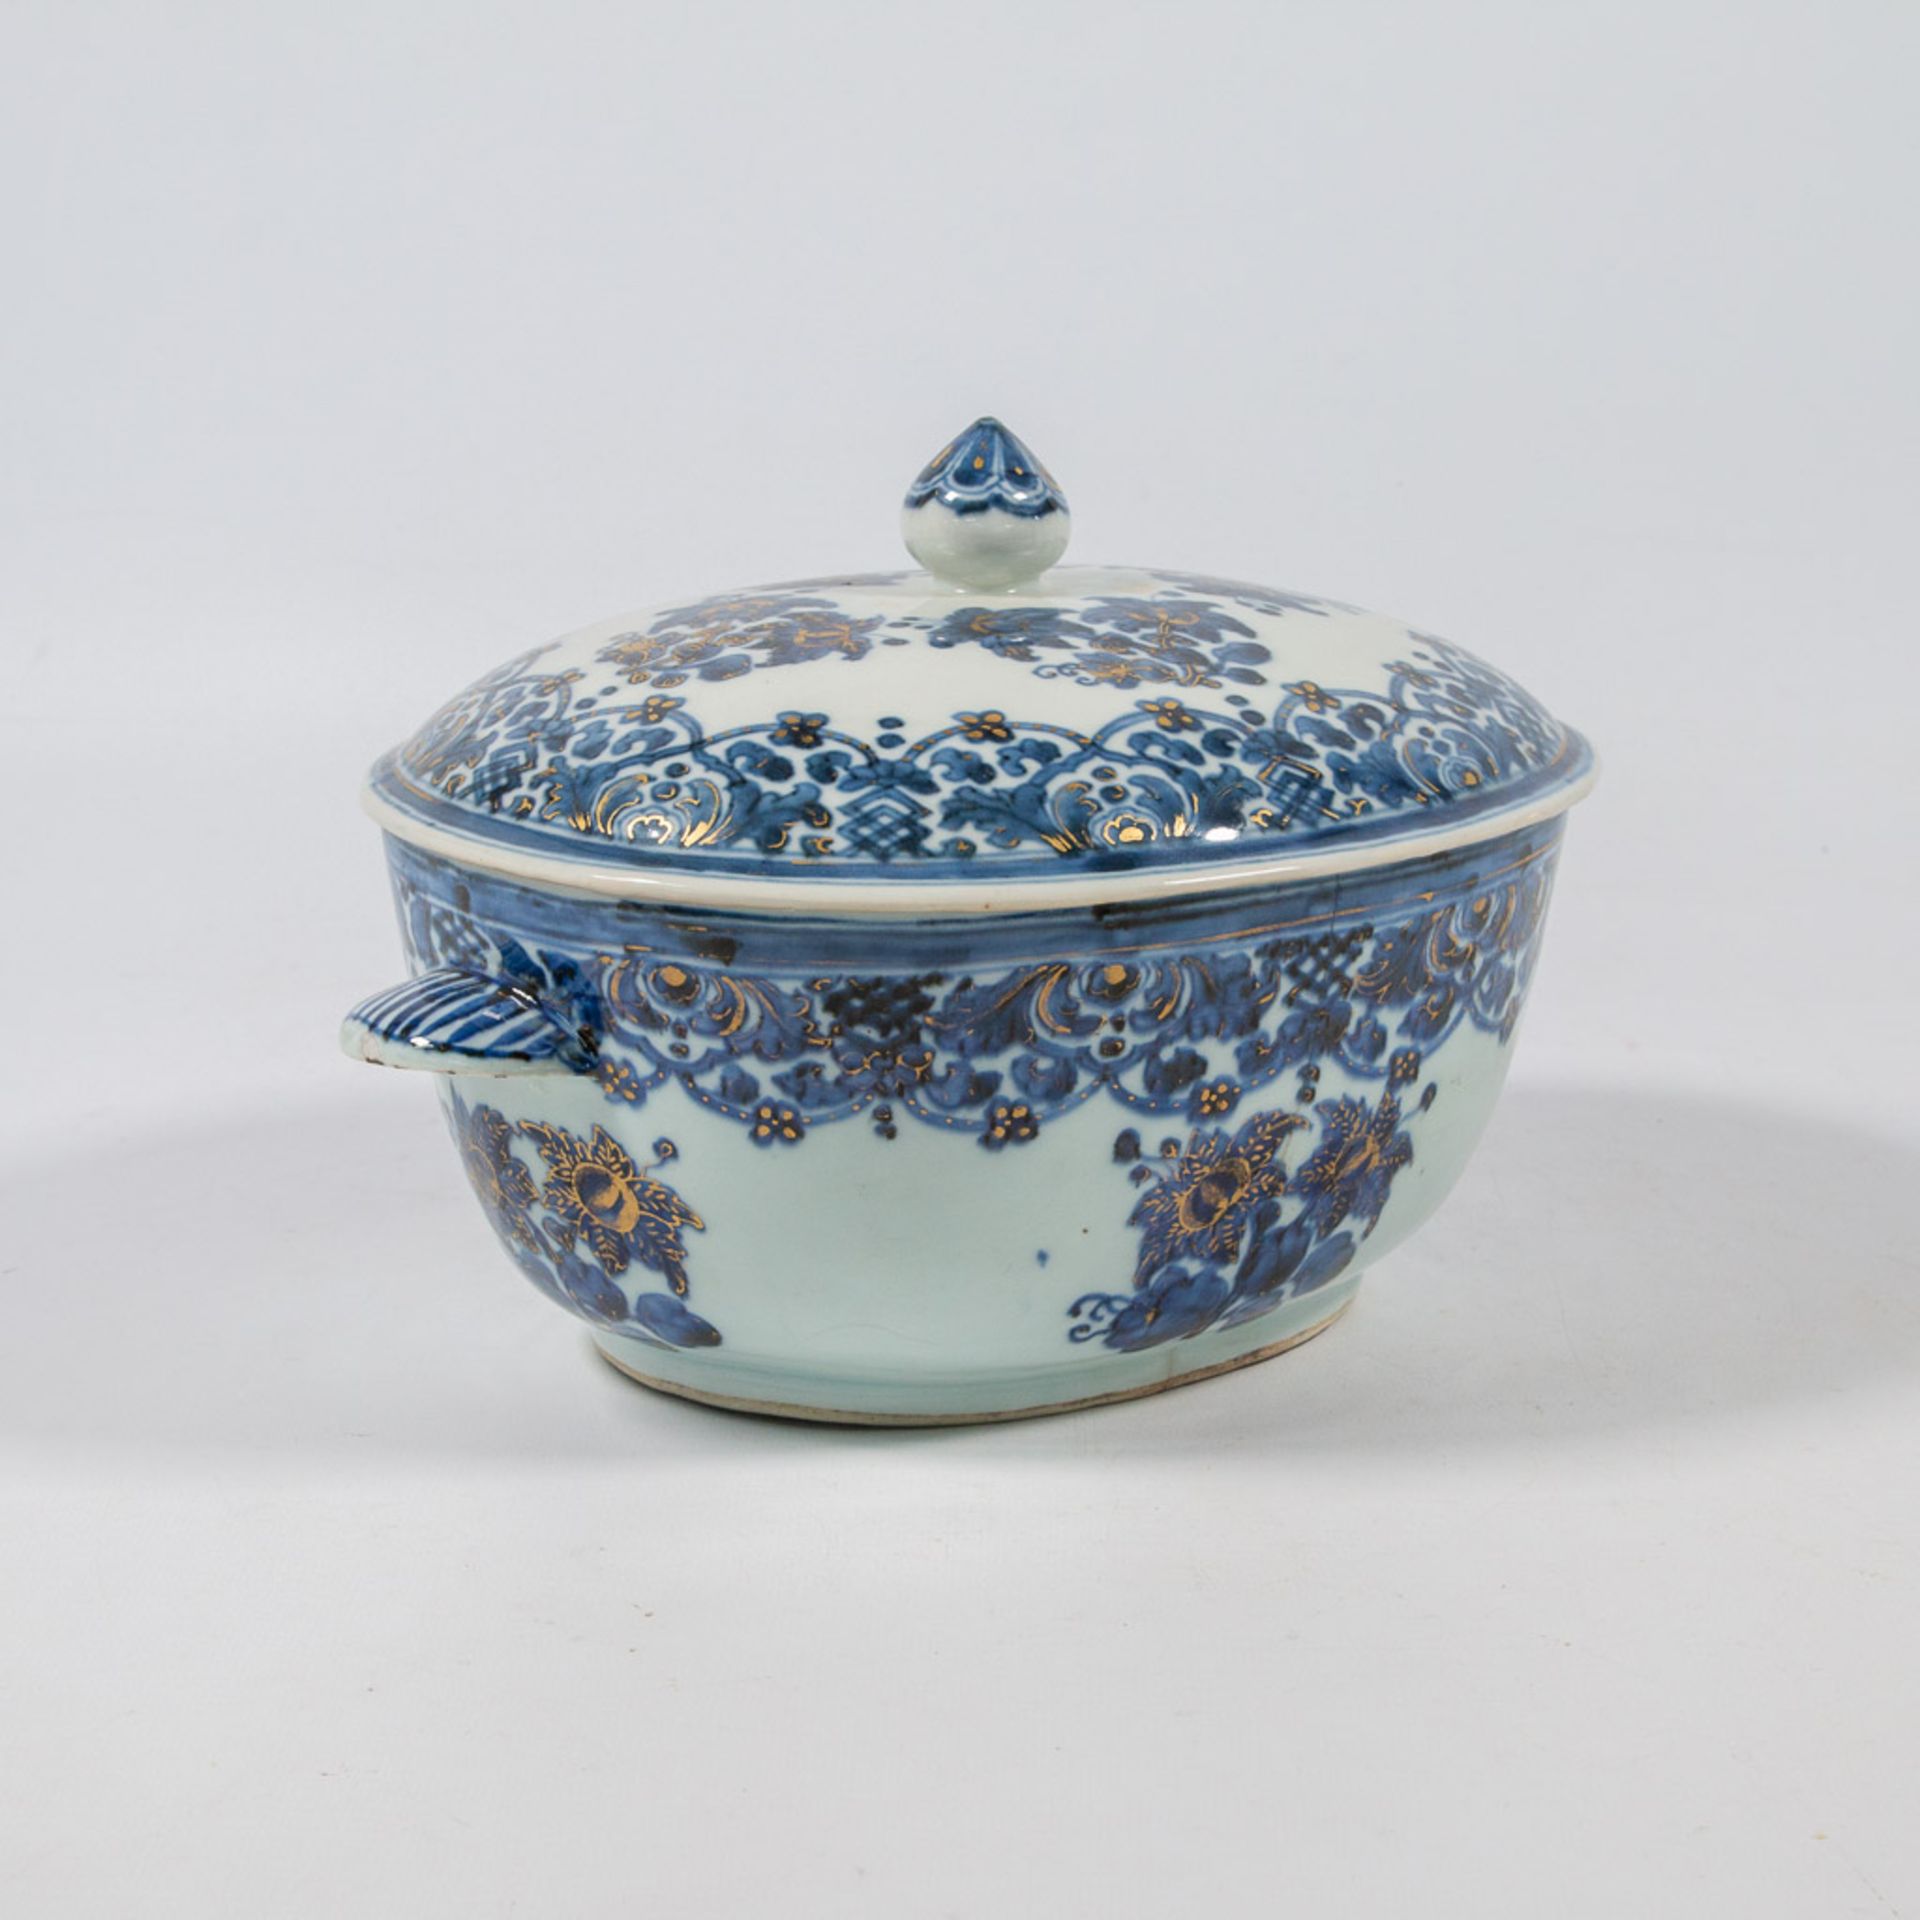 A small tureen with lid, Chinese export porcelain with underglaze blue, white and overglaze gold flo - Image 14 of 24